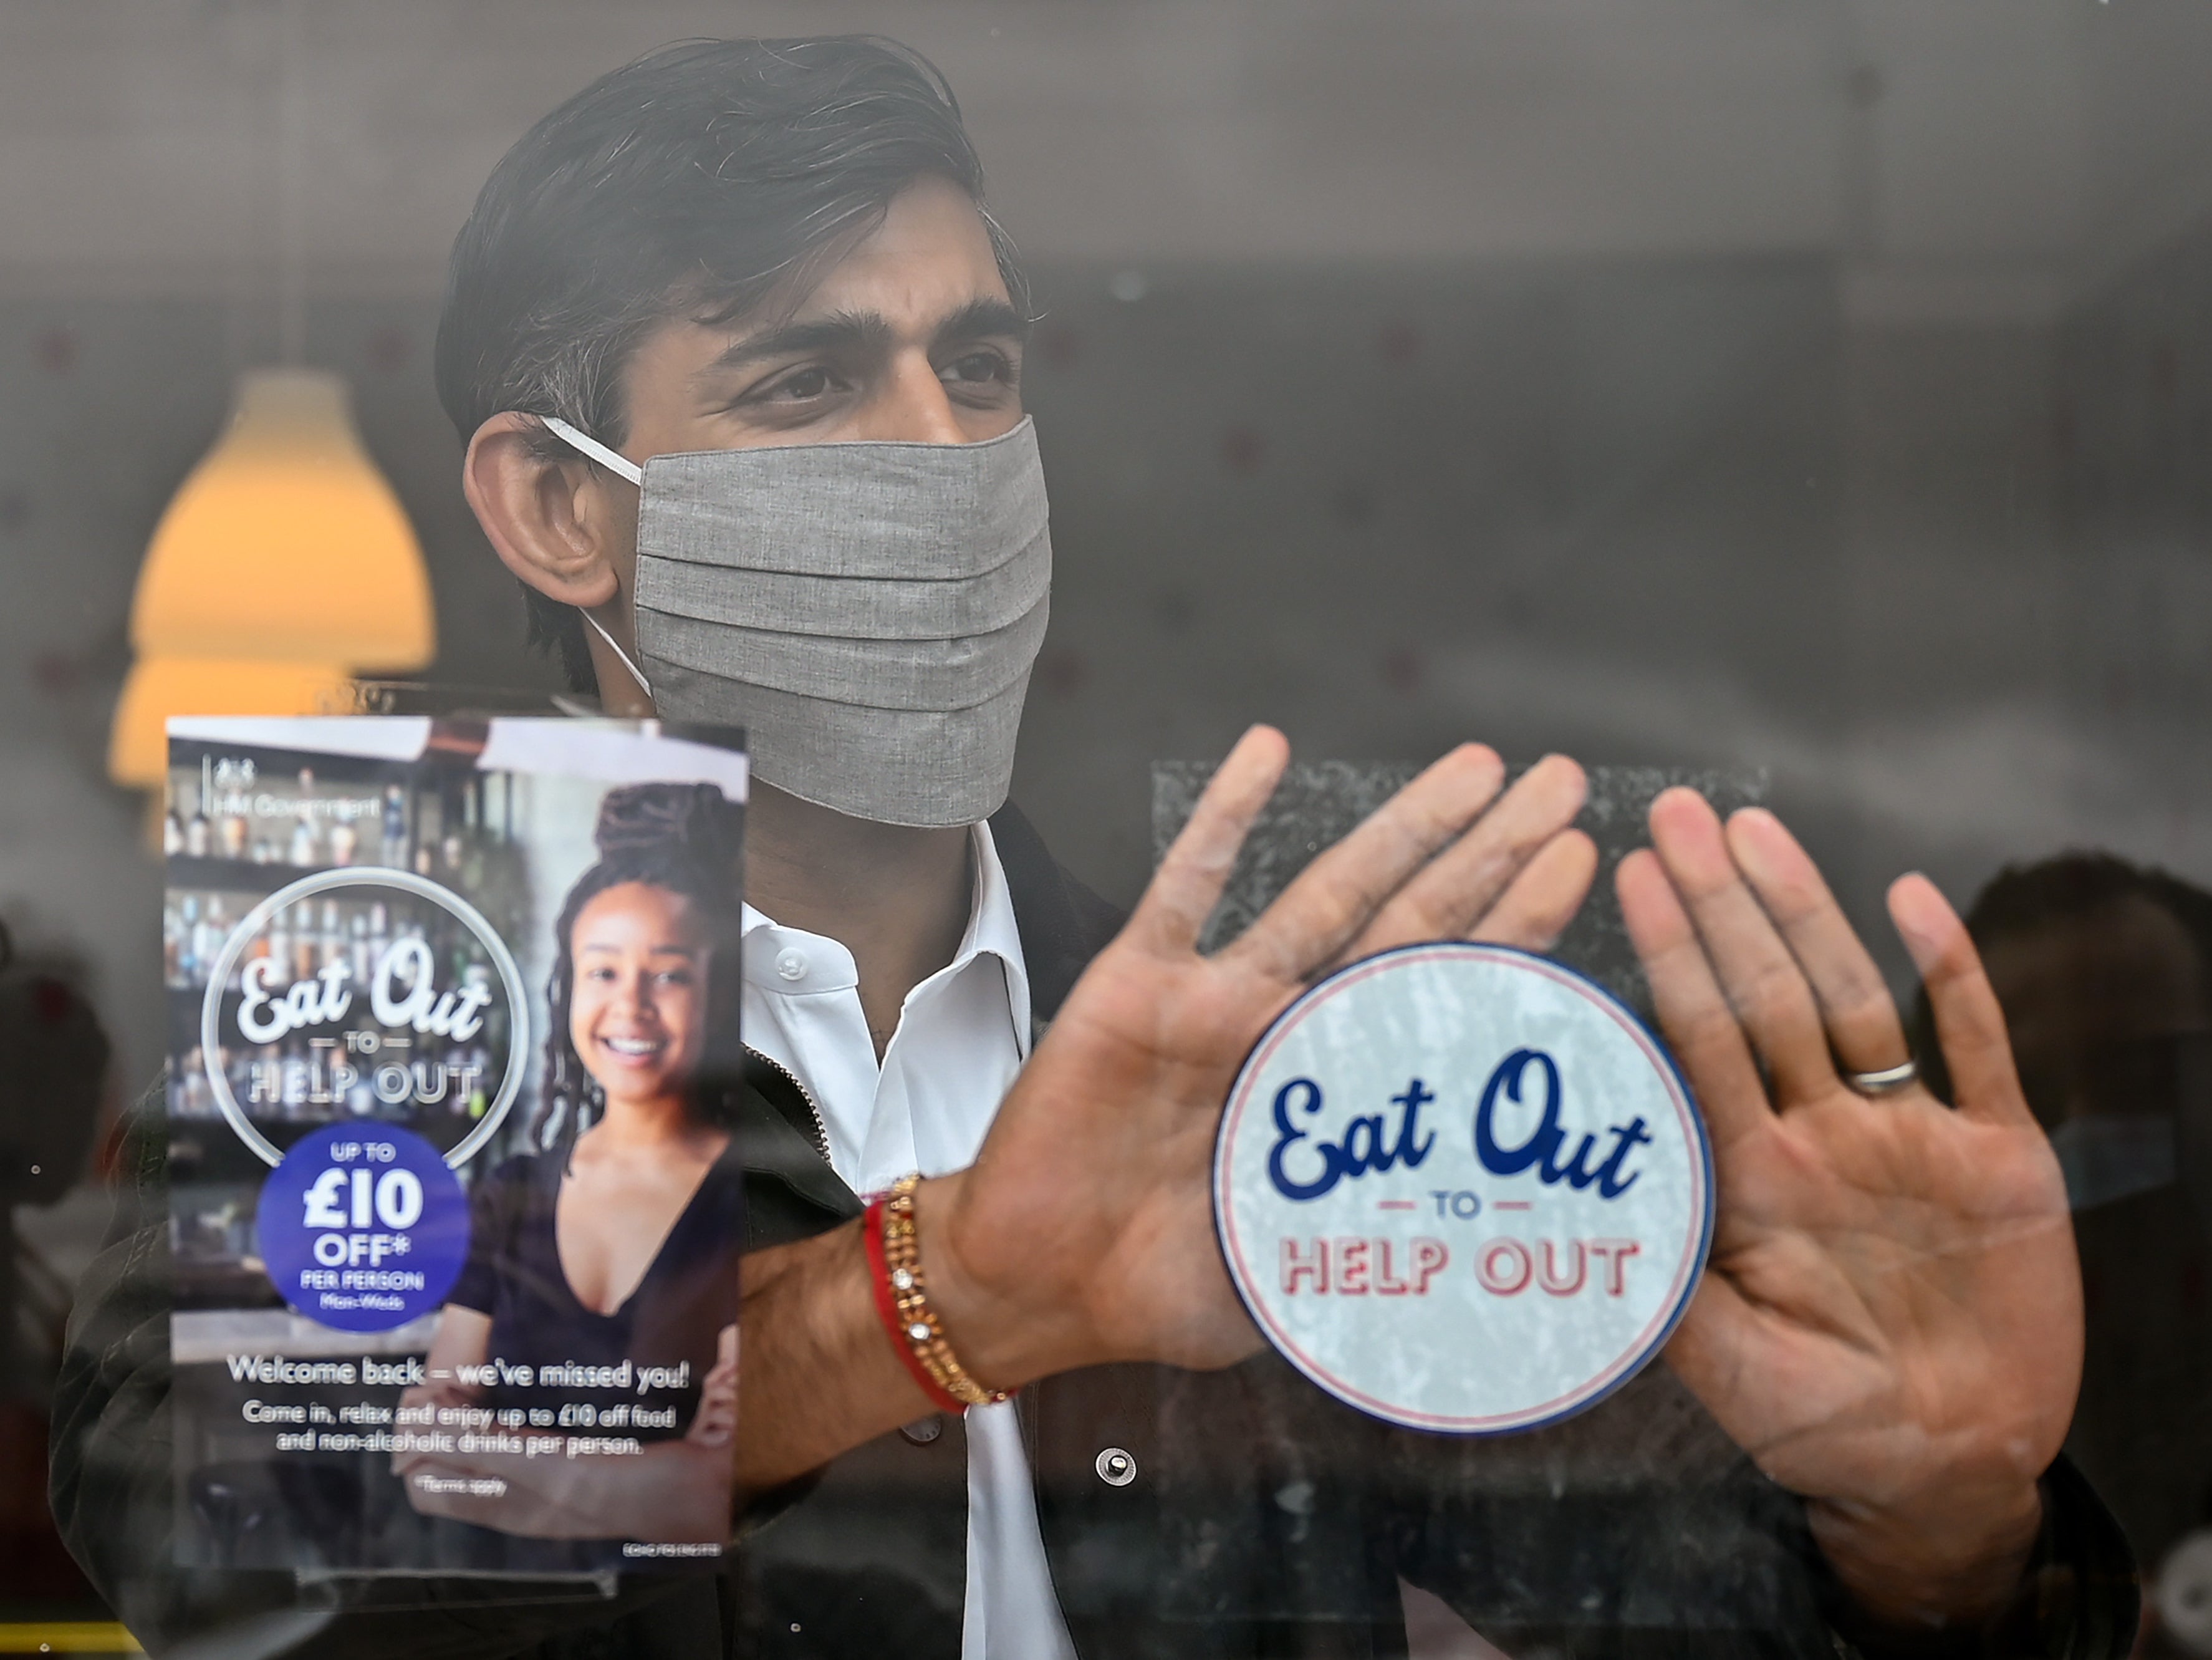 Rishi Sunak places an Eat Out to Help Out sticker in the window of a business during a visit to Rothesay on the Isle of Bute, Scotland